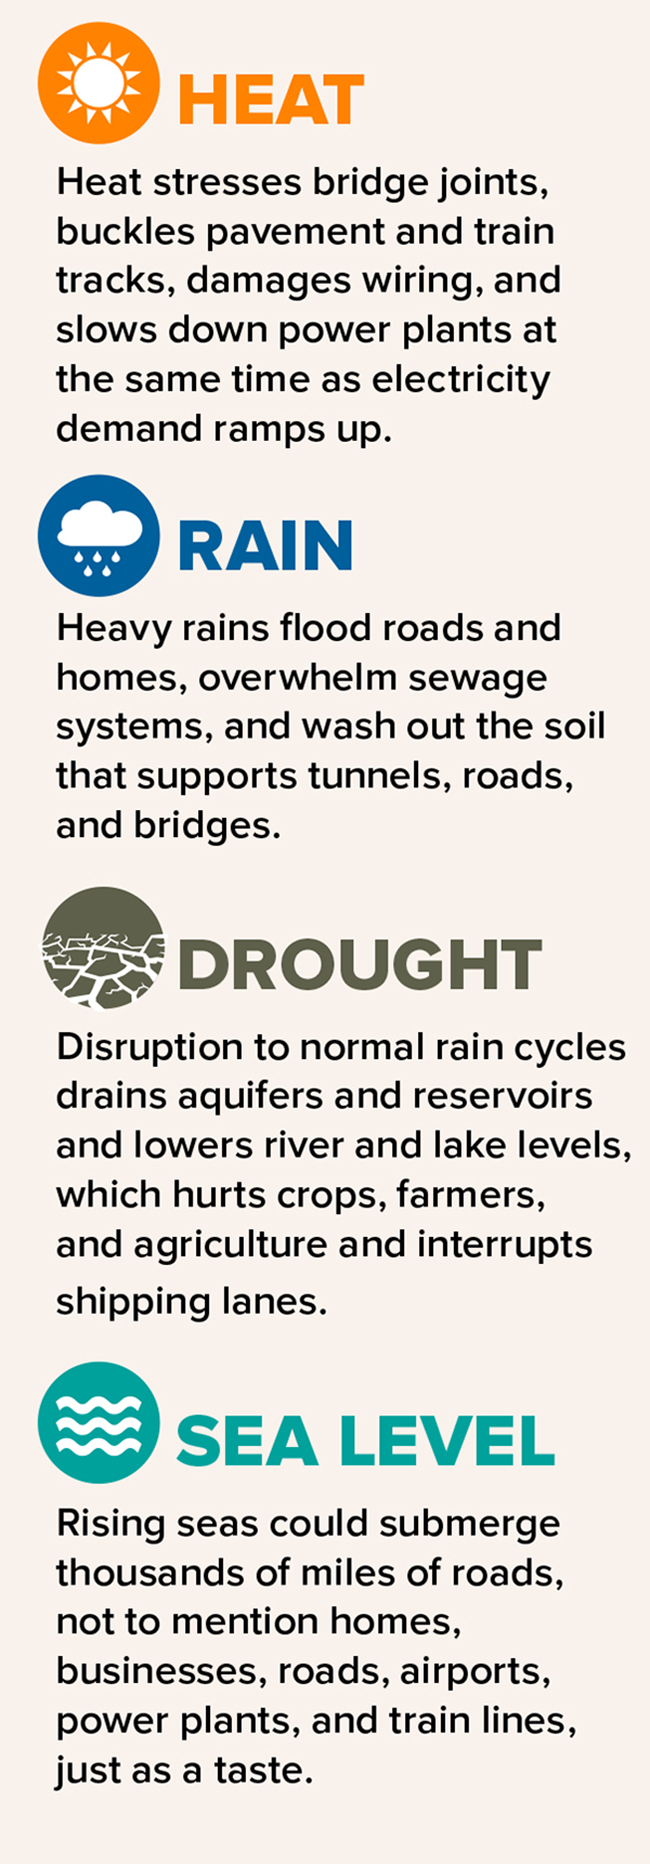 Weather factors such as heat, rain, drought, and sea level affect infrastructure.